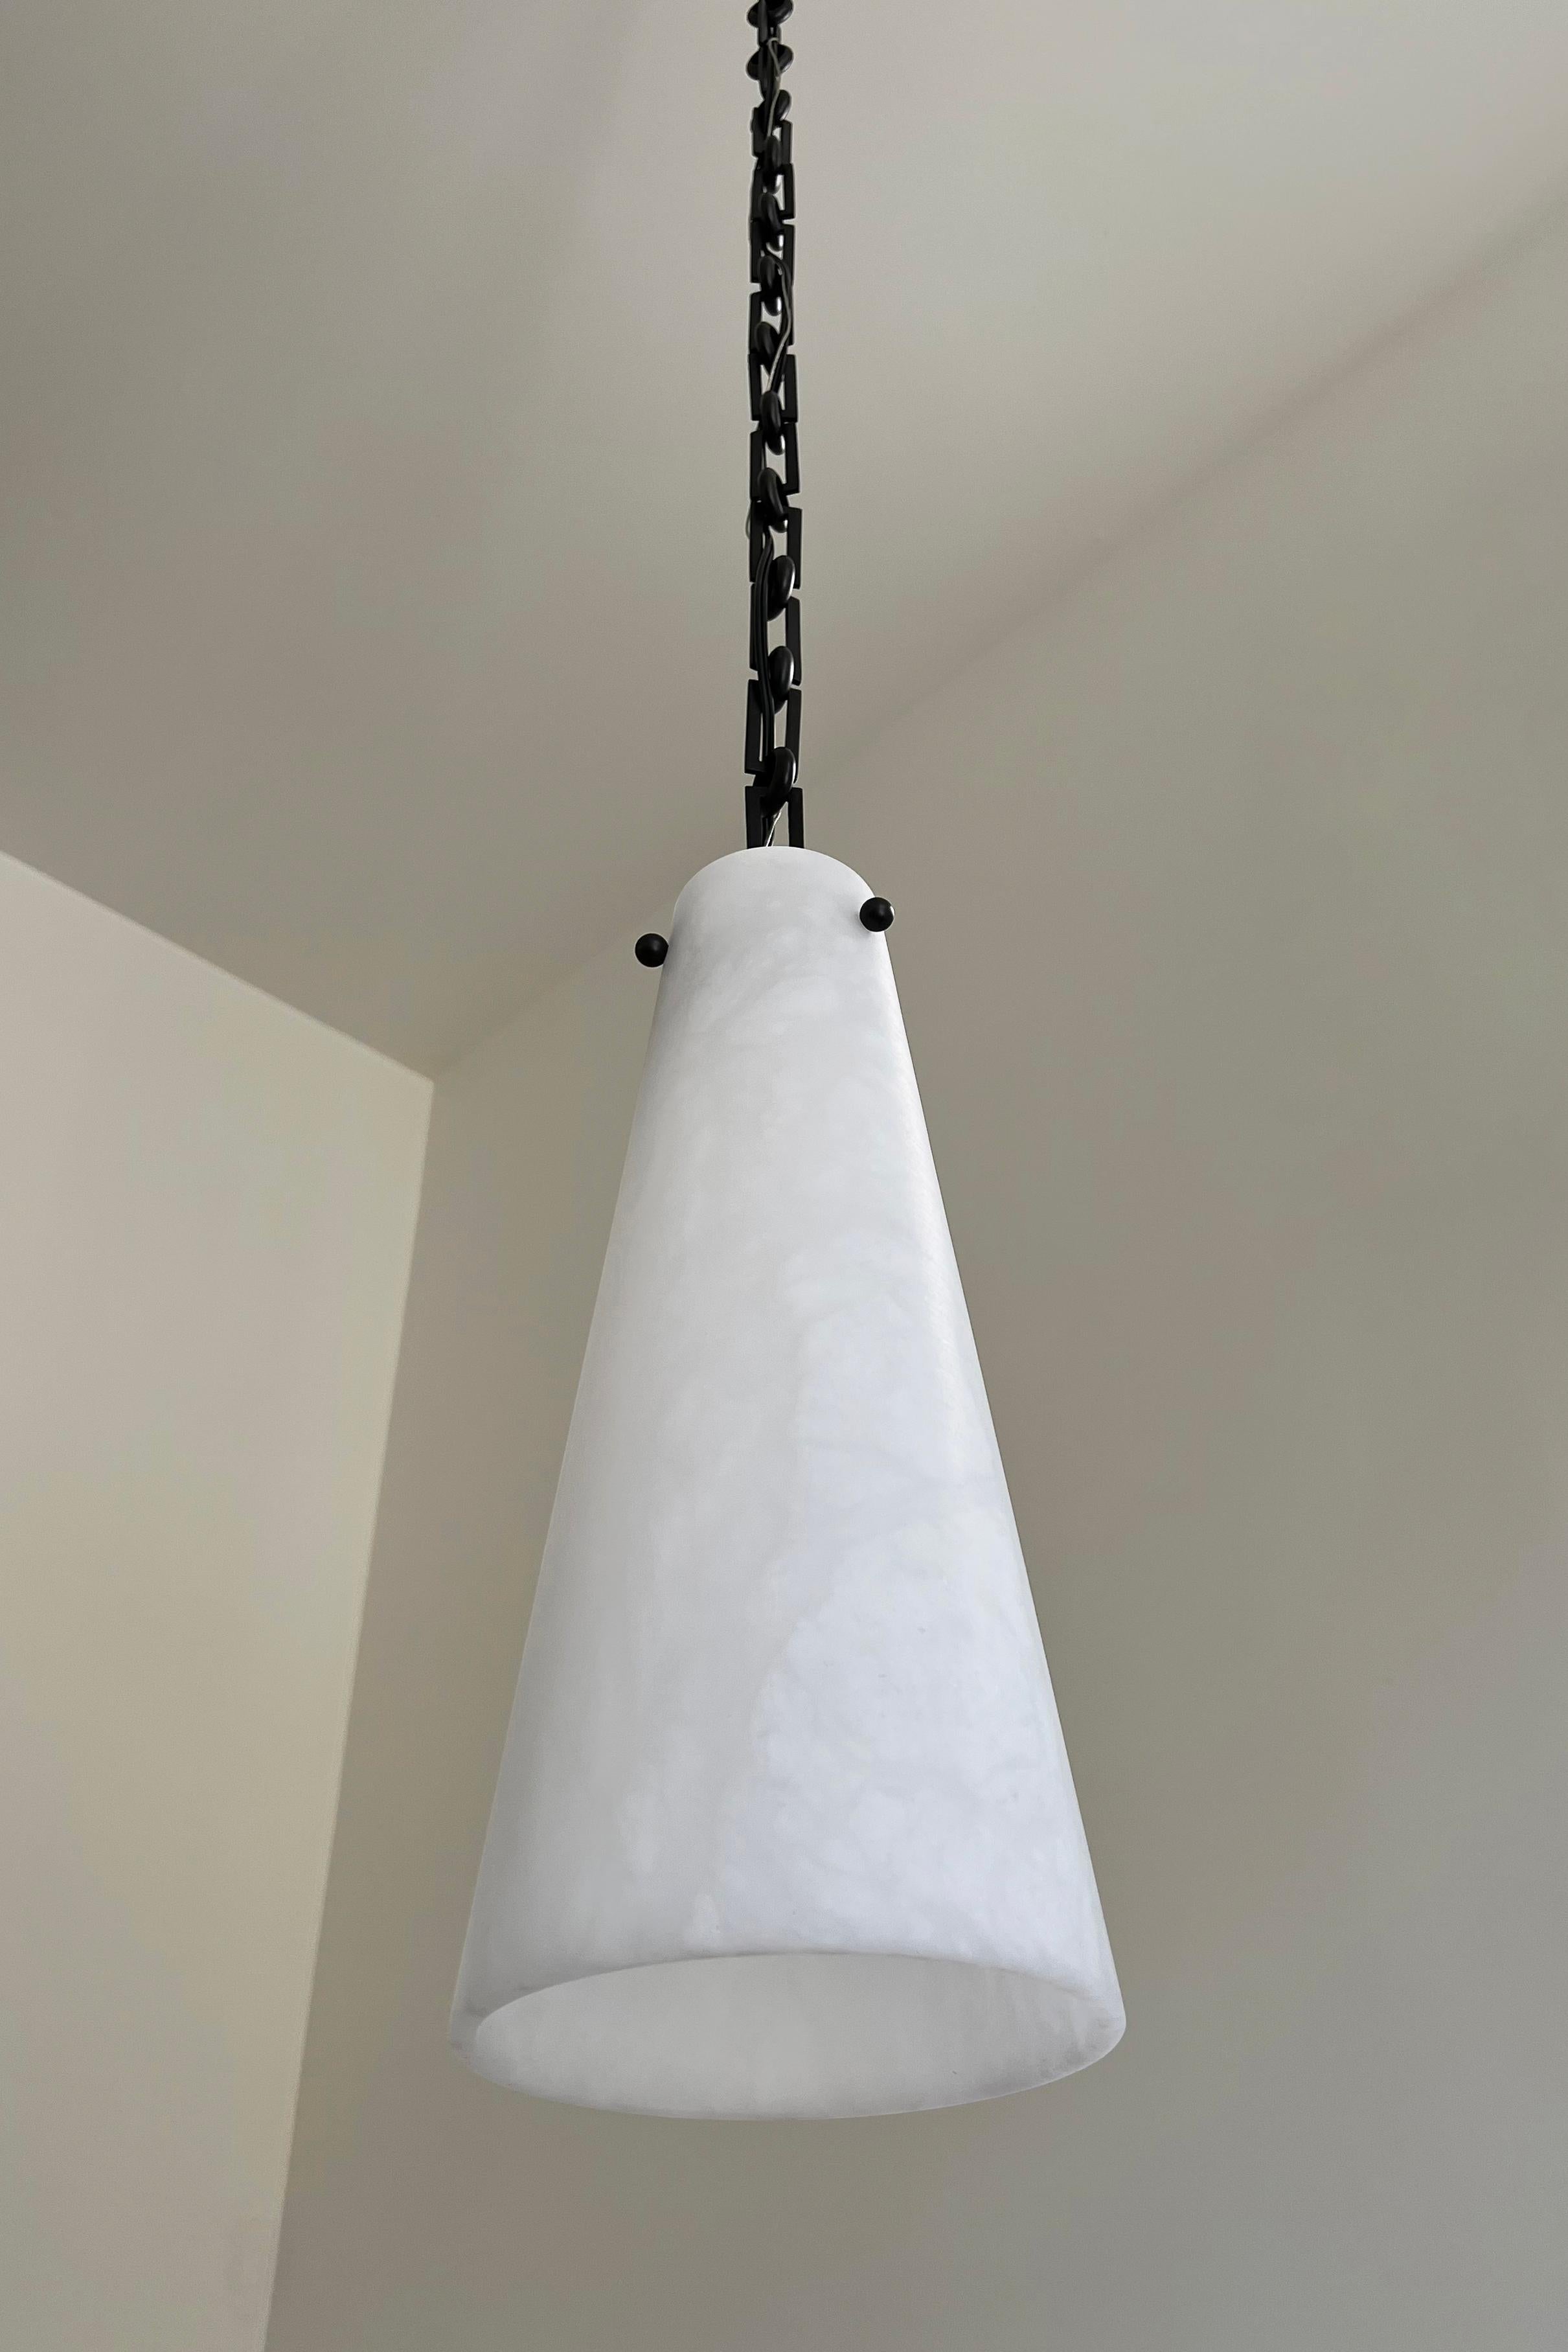 Blackened Contemporary Lucca Pendant 202A-1S in Alabaster by Orphan Work, 2021 For Sale